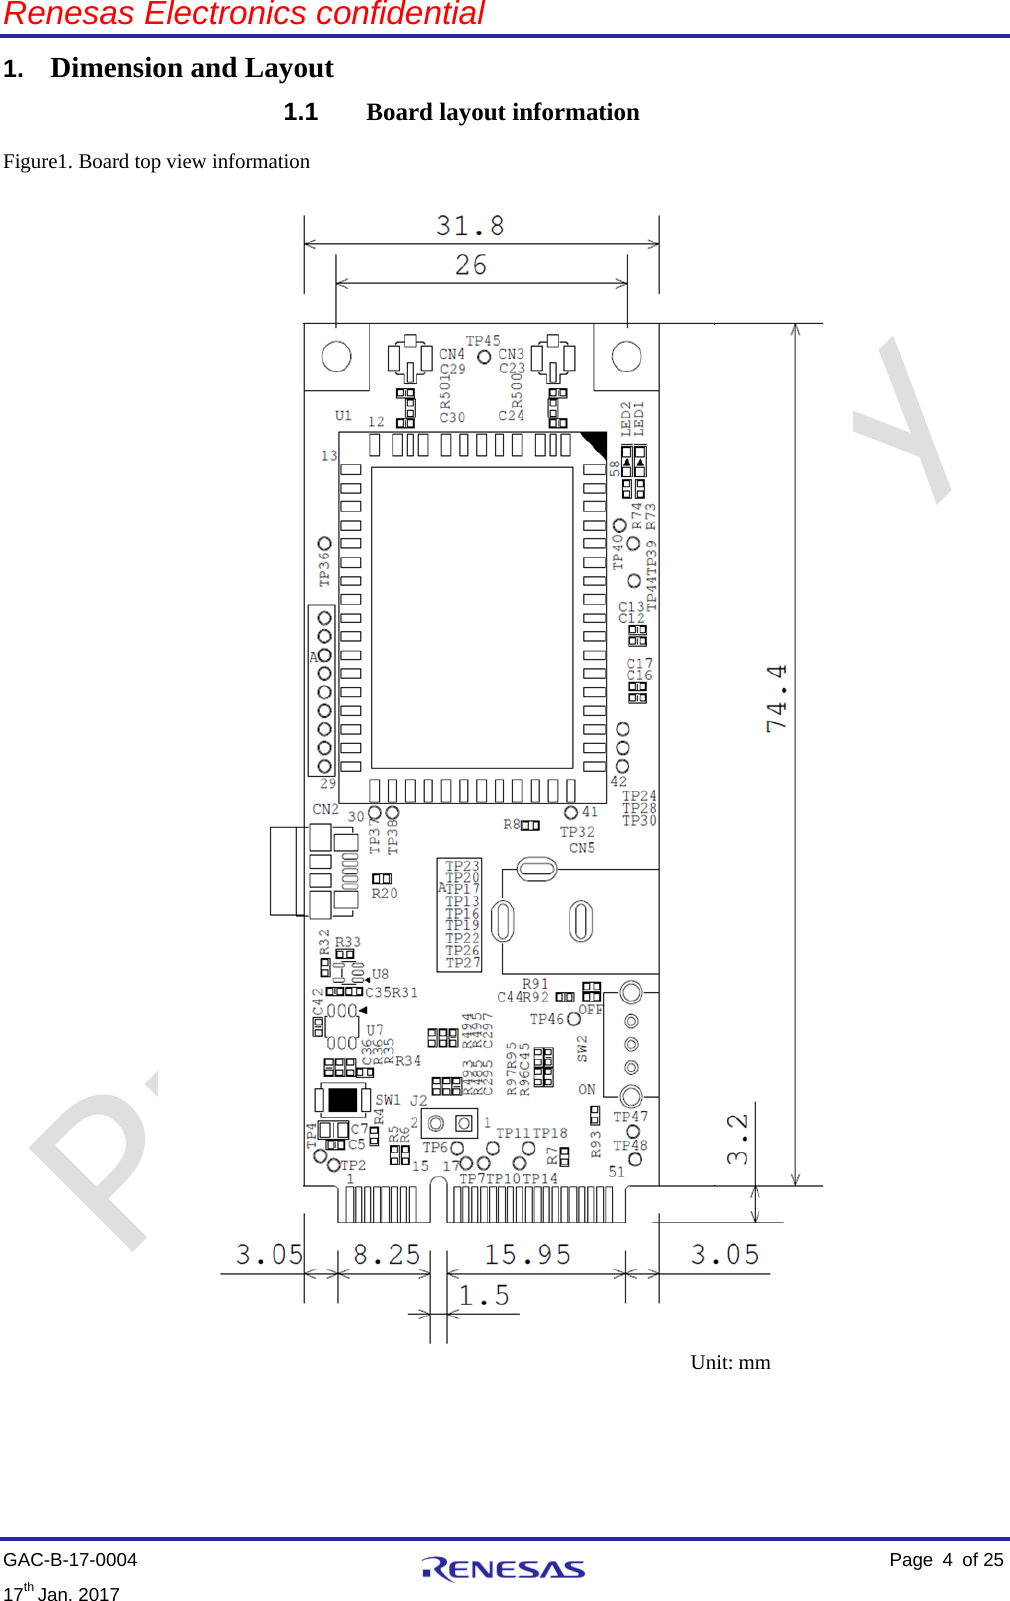 Renesas Electronics confidential   GAC-B-17-0004    Page  4  of 25 17th Jan. 2017   1. Dimension and Layout  1.1 Board layout information  Figure1. Board top view information    Unit: mm    